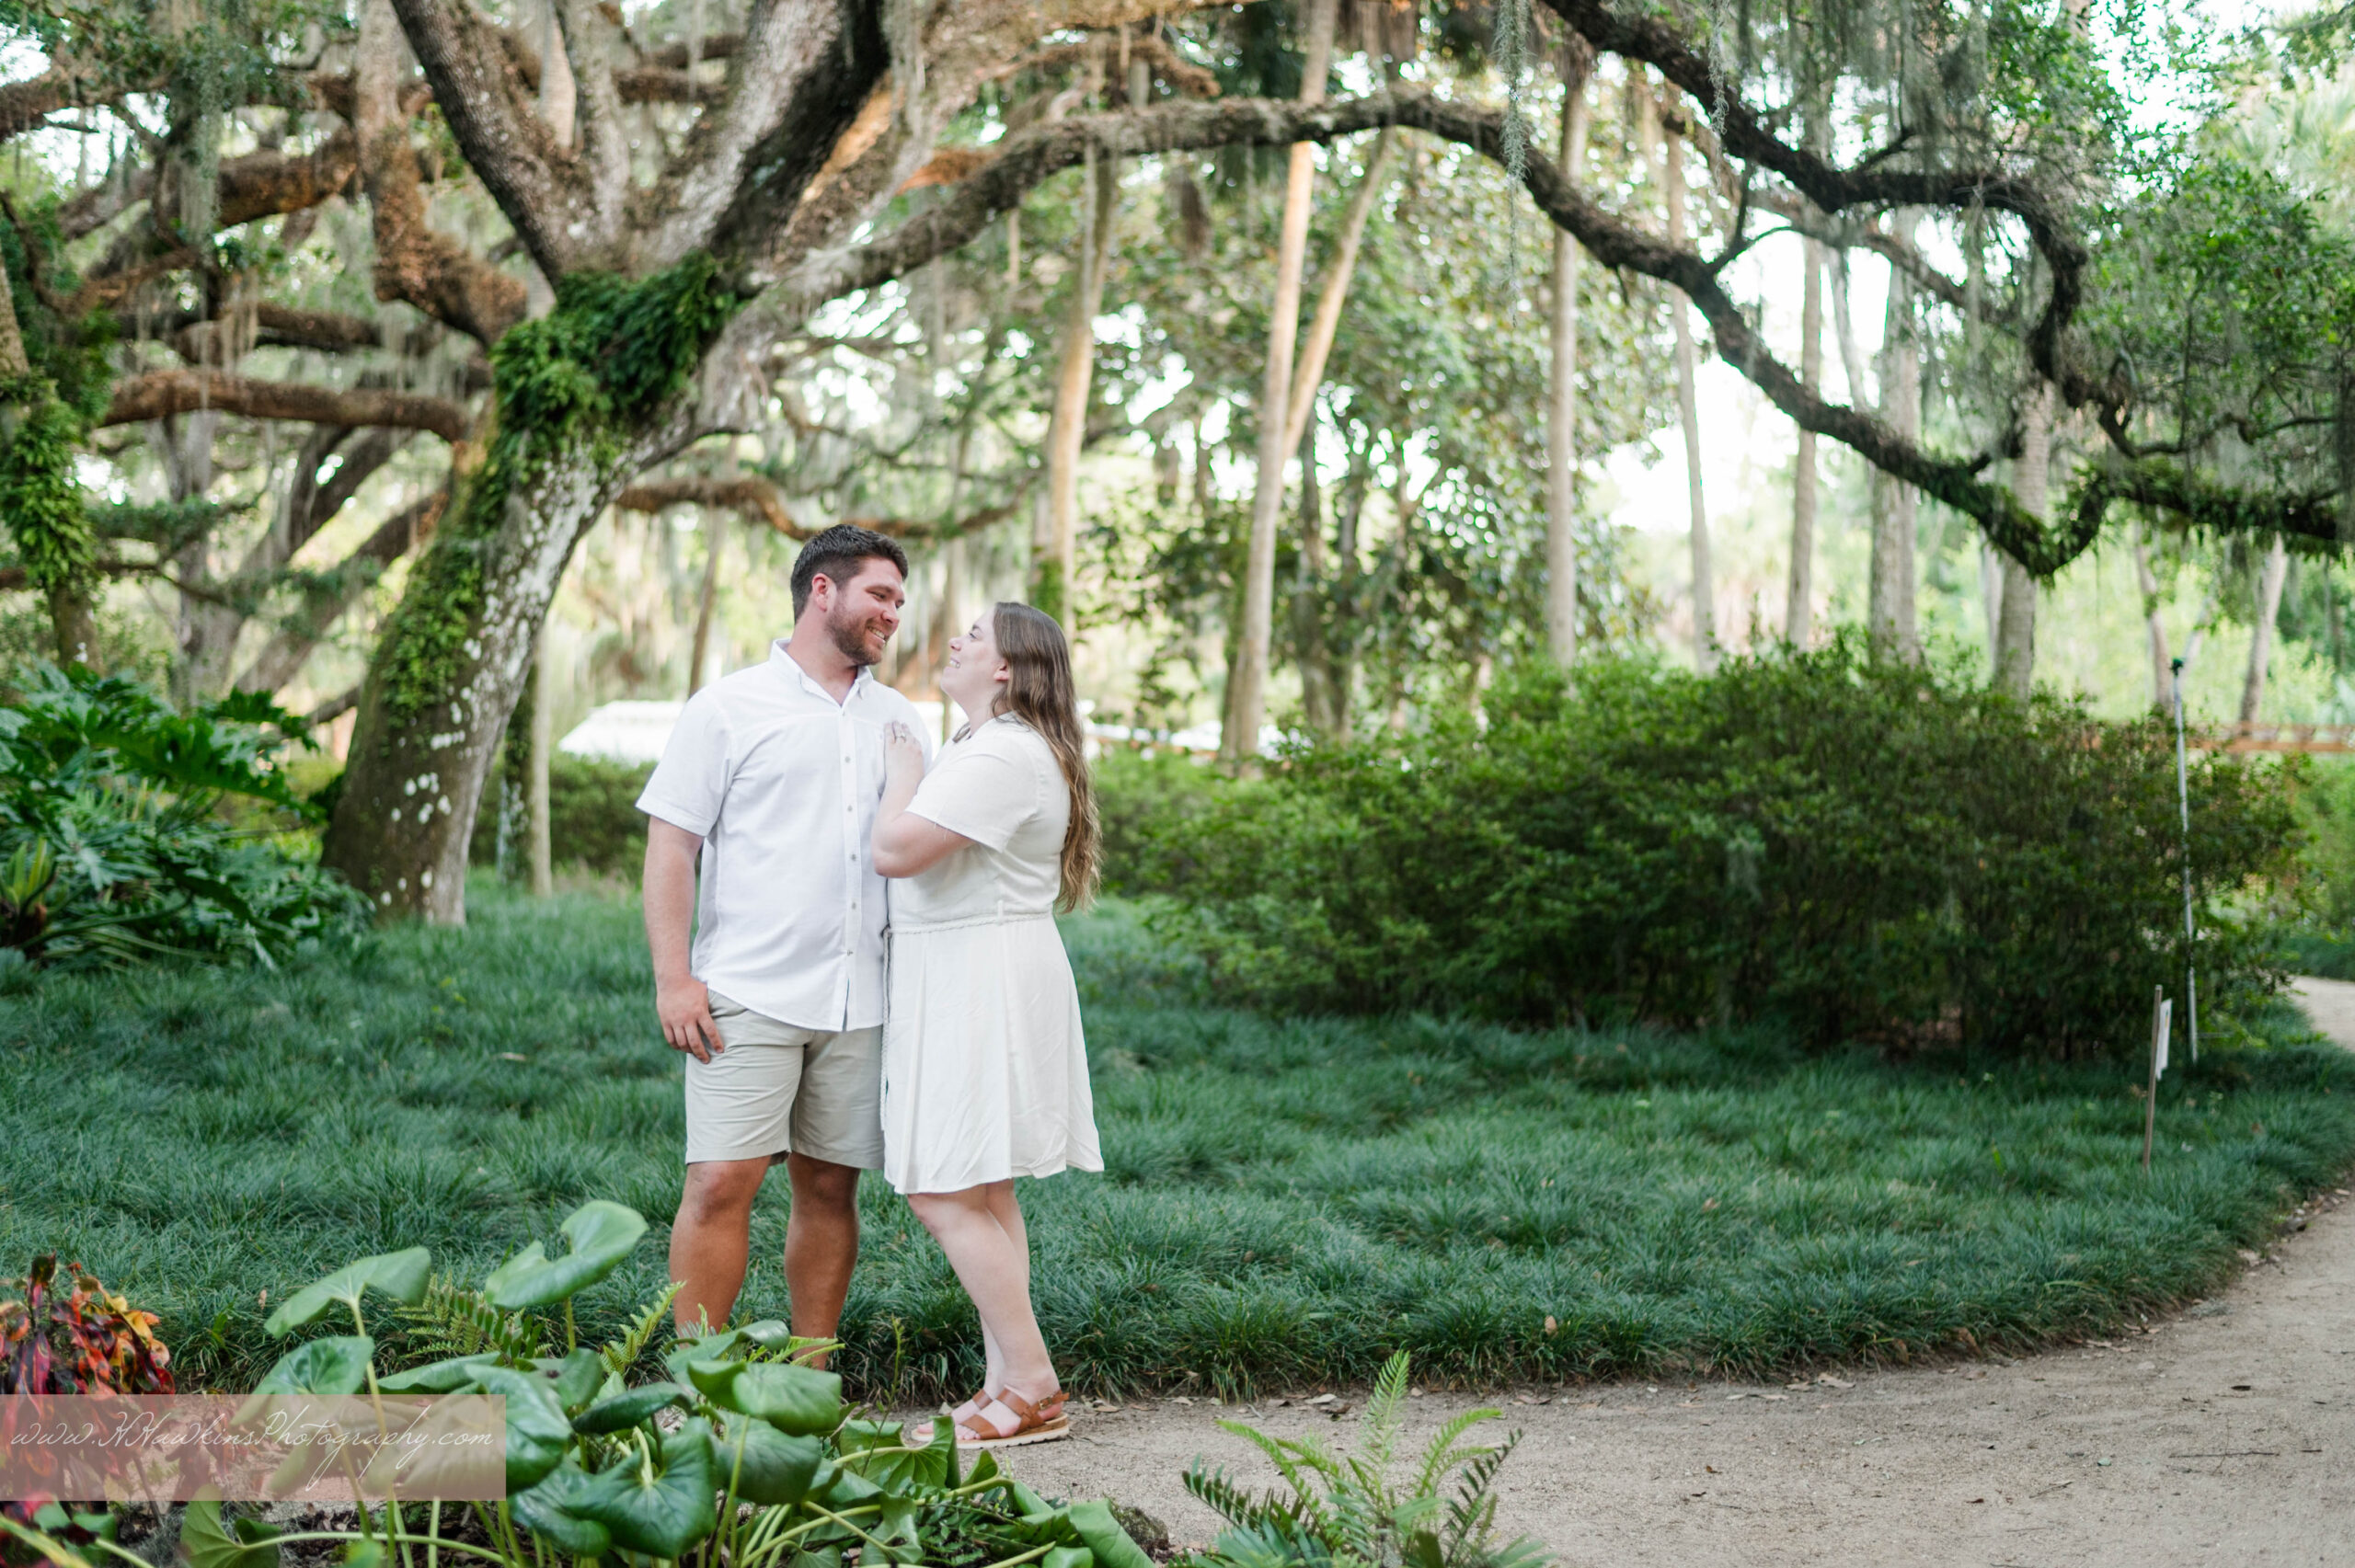 Engaged couple in white dress and shirt stand in front of mammoth mature oak trees at Washington Oaks Gardens State Park during their engagement photo session